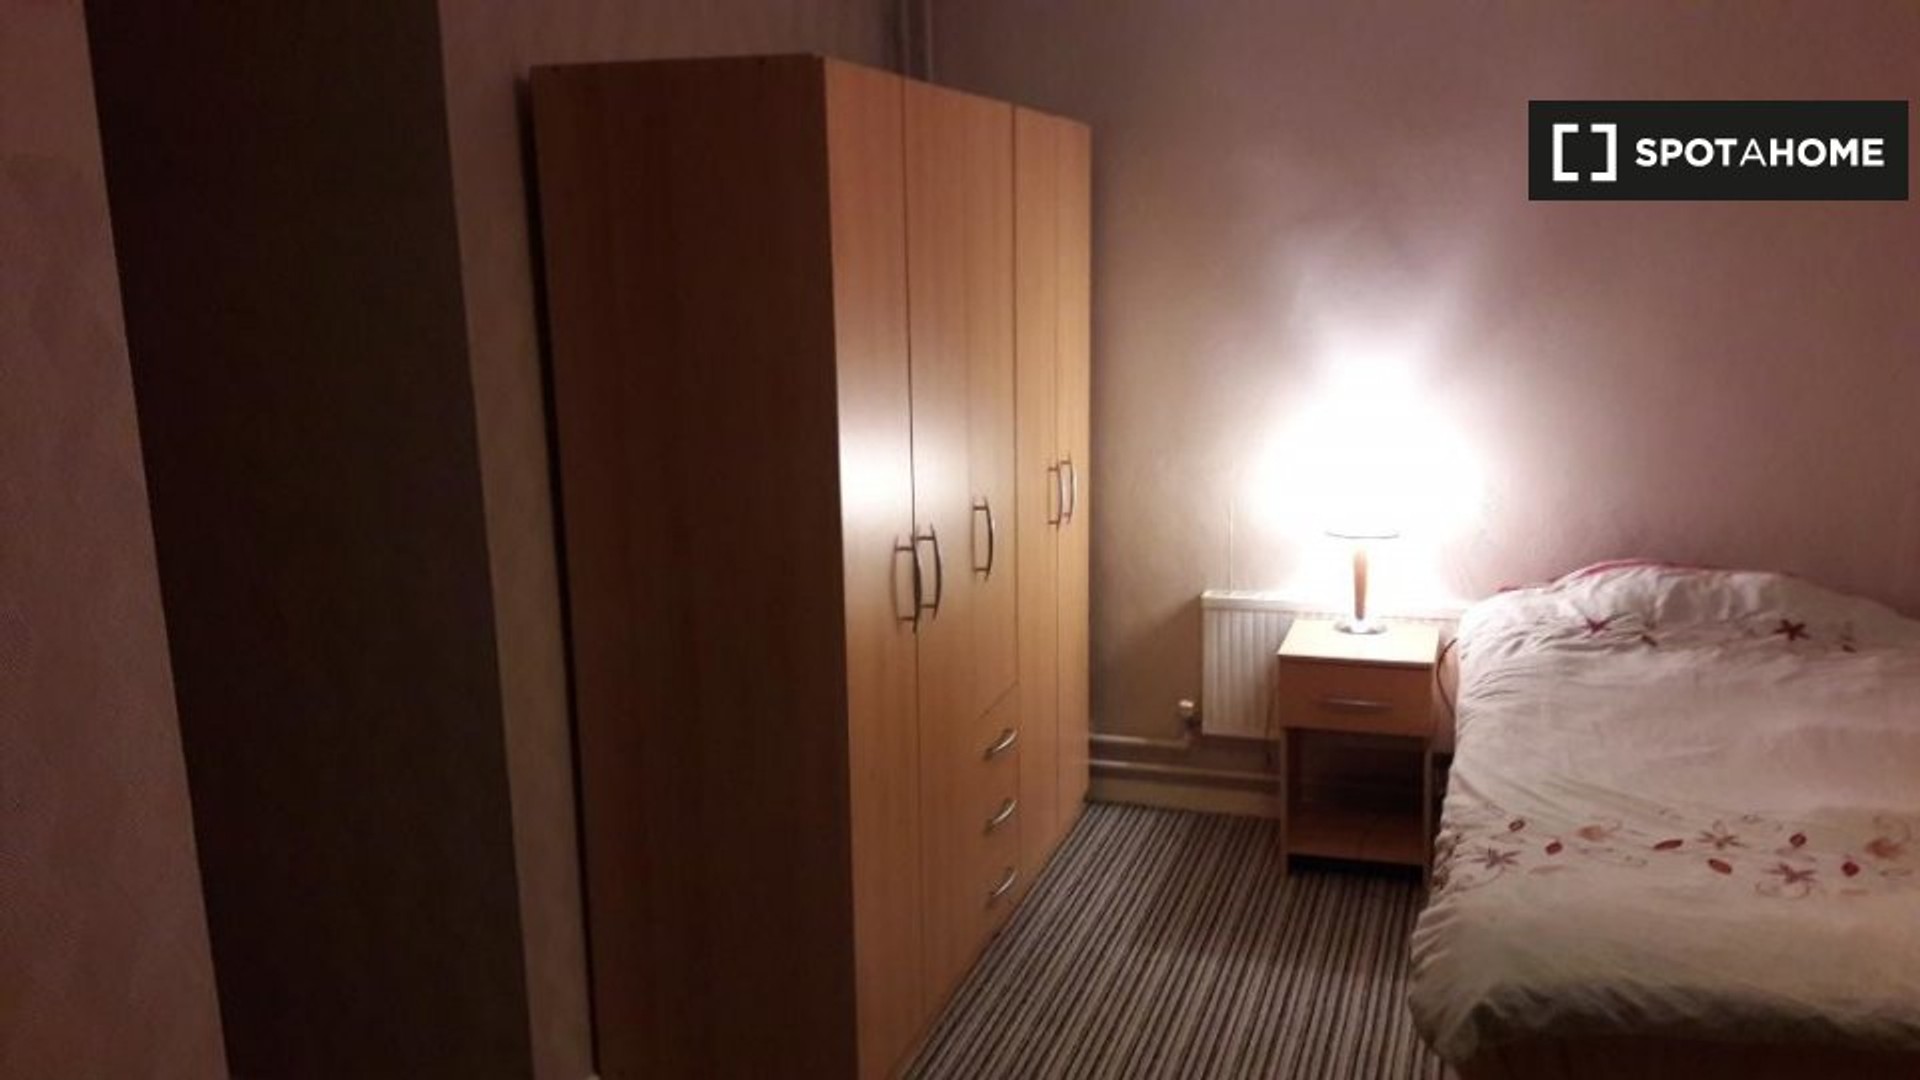 Room for rent in a shared flat in Nottingham